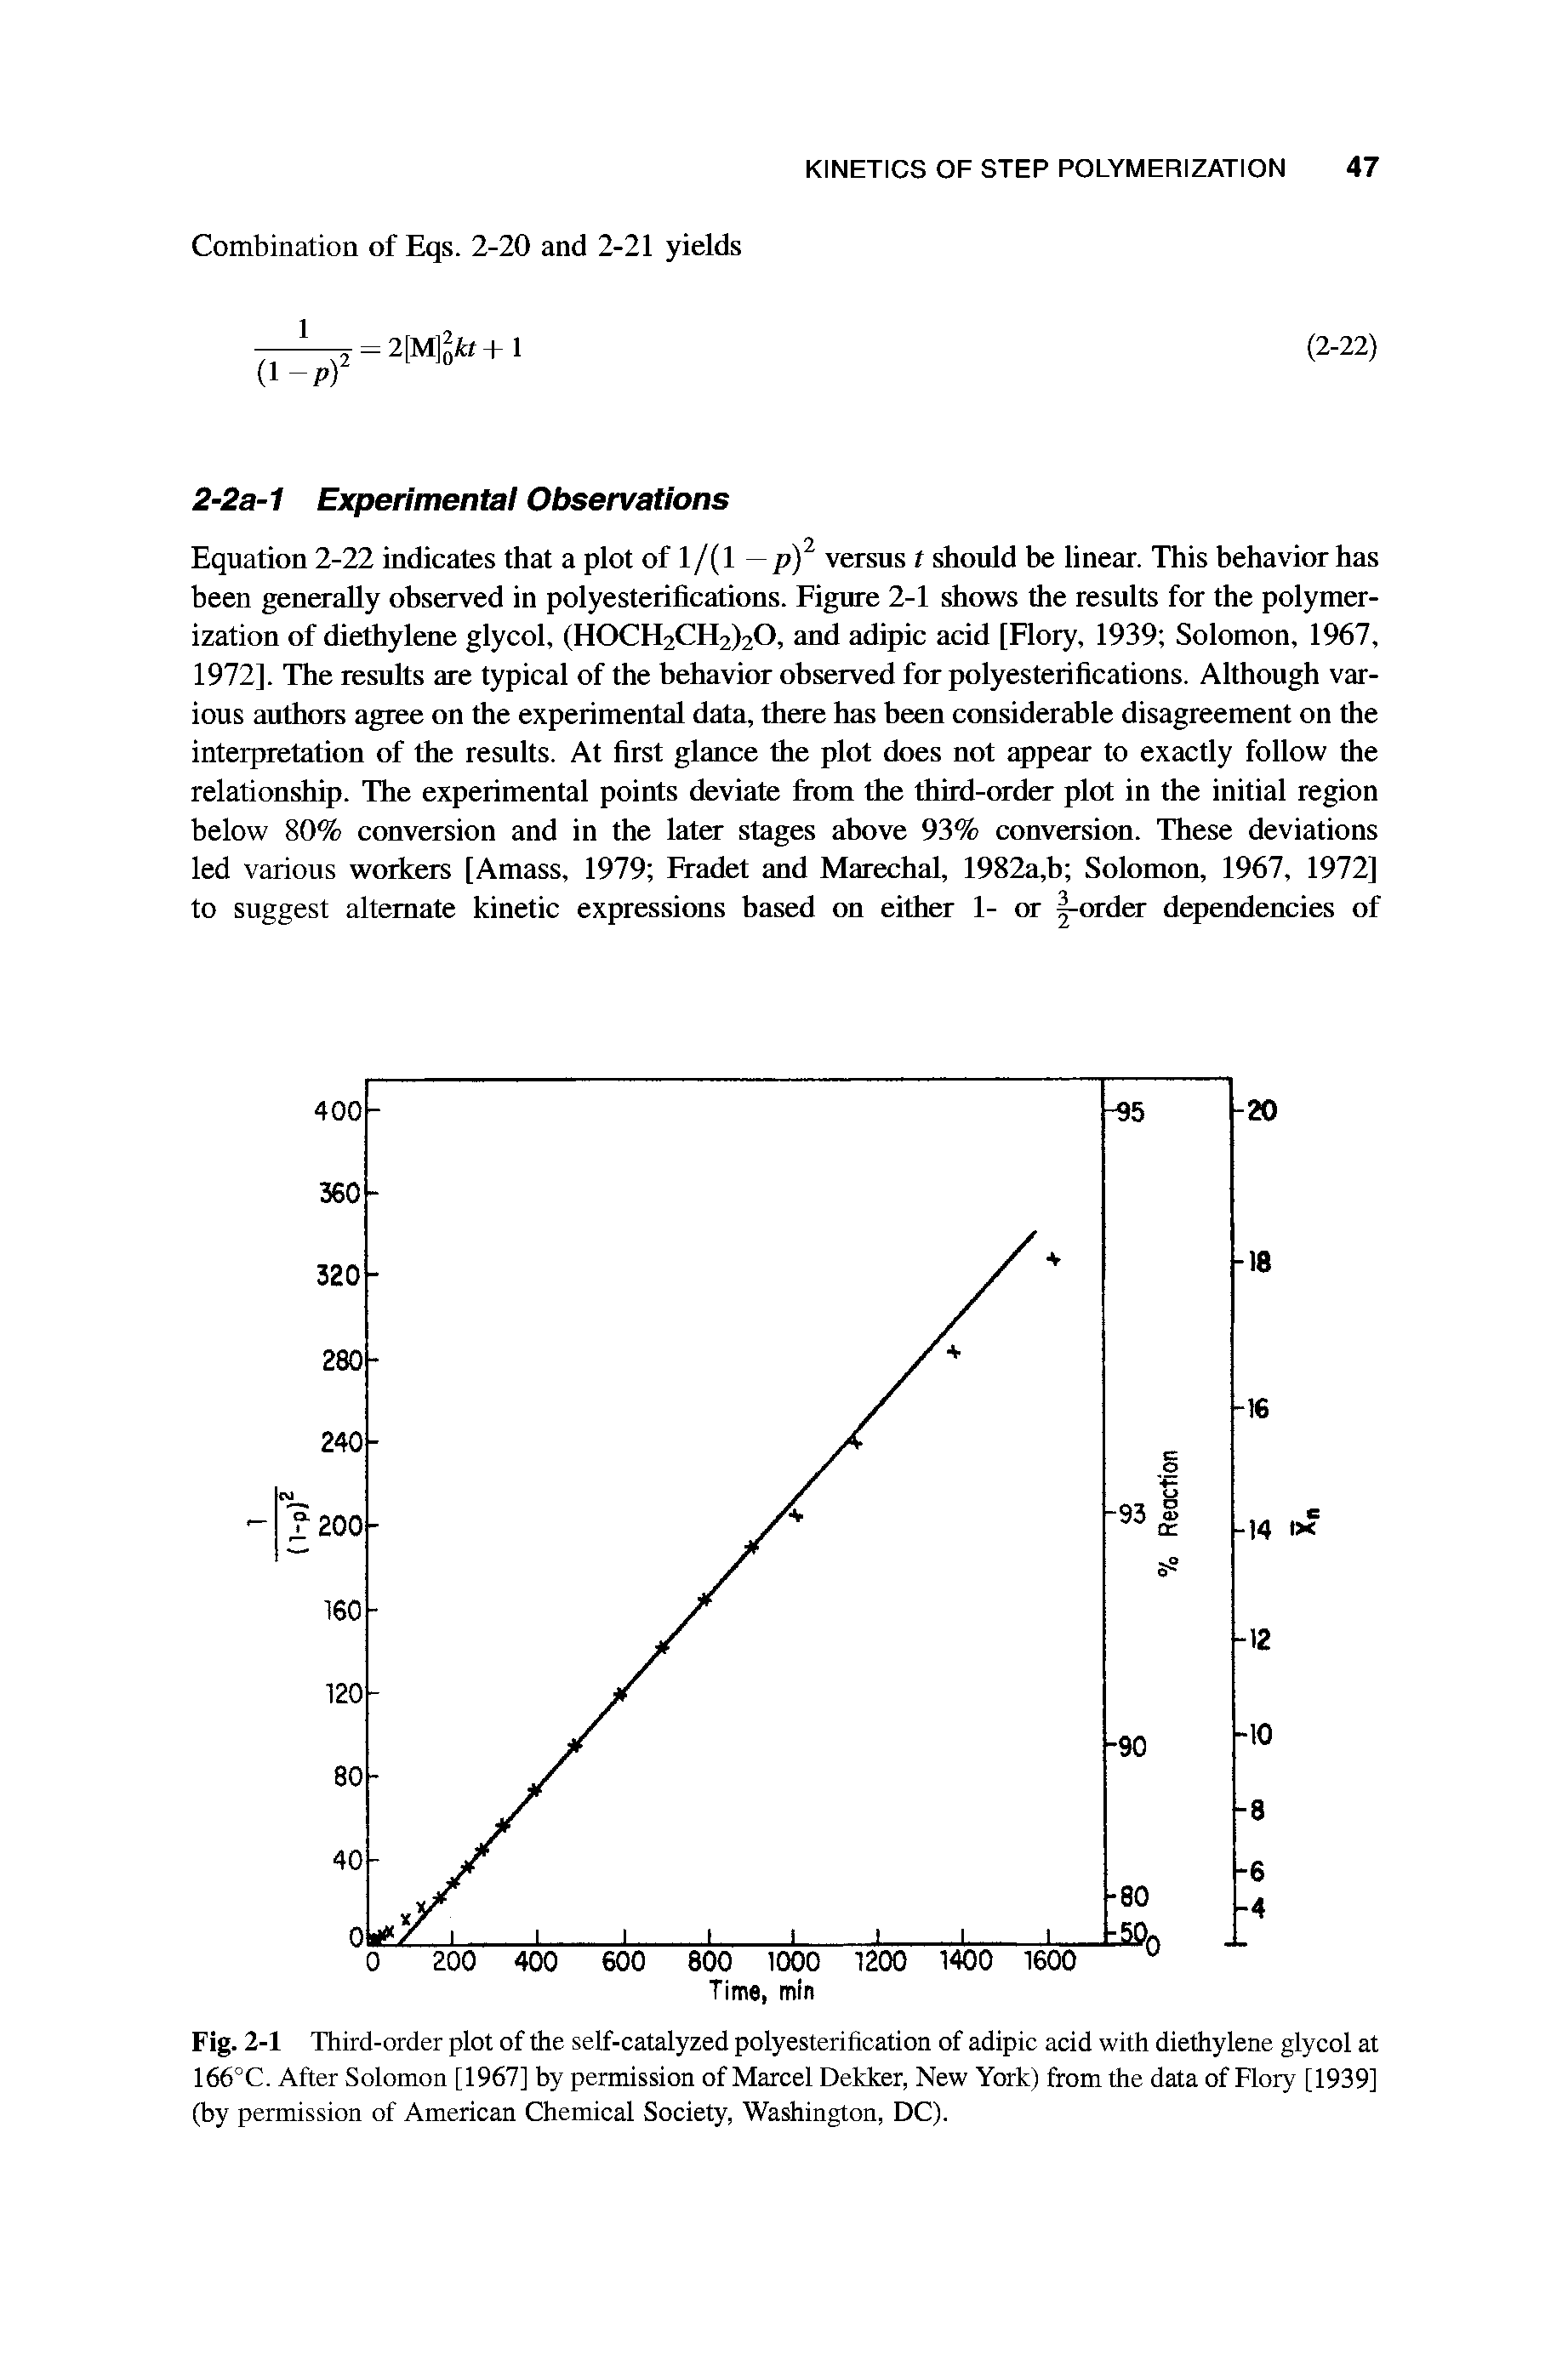 Fig. 2-1 Third-order plot of the self-catalyzed polyesterification of adipic acid with diethylene glycol at 166°C. After Solomon [1967] by permission of Marcel Dekker, New York) from the data of Flory [1939] (by permission of American Chemical Society, Washington, DC).